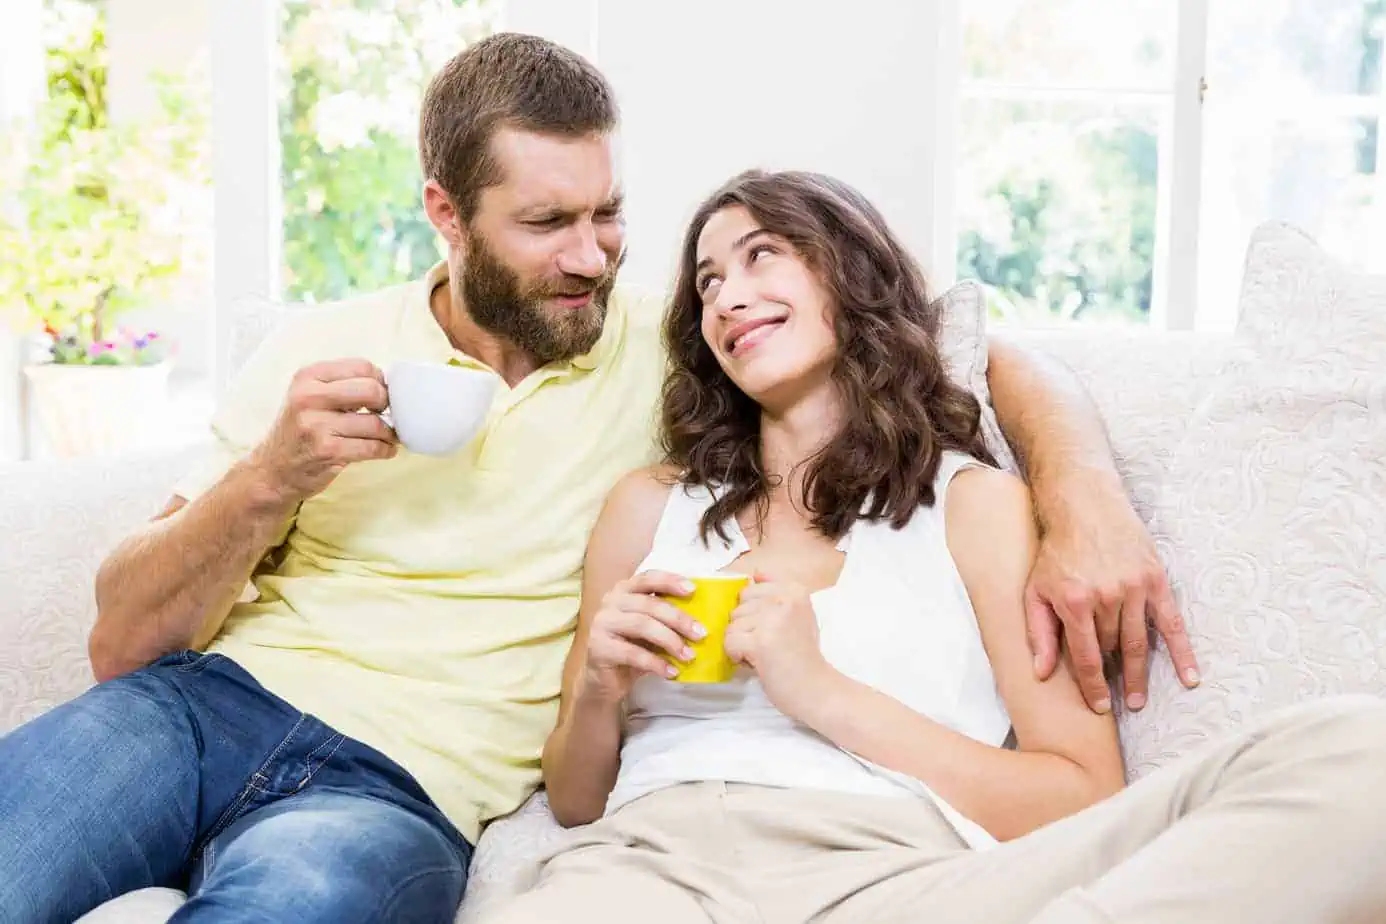 A man and woman sitting on a couch drinking coffee